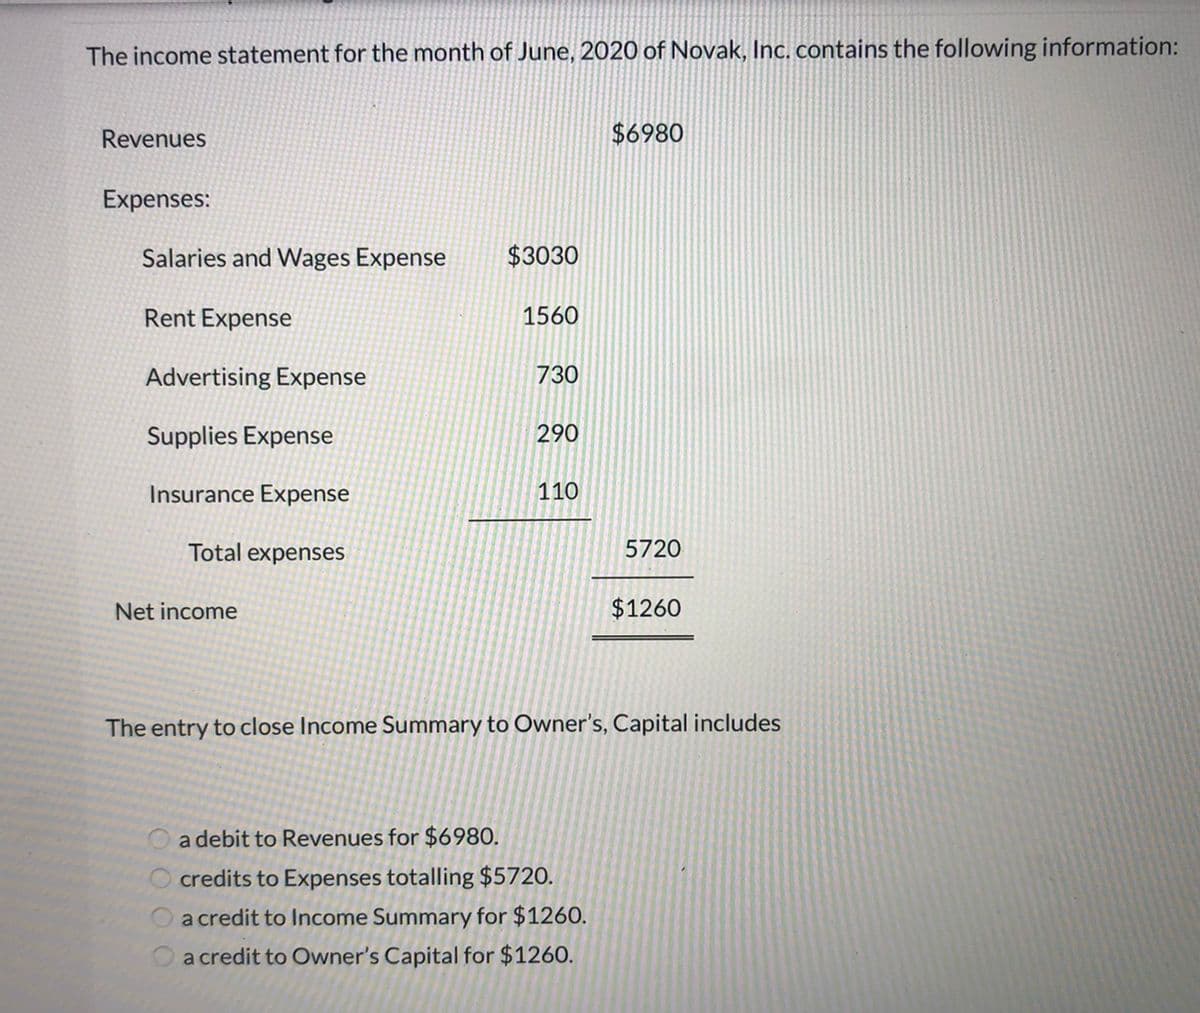 The income statement for the month of June, 2020 of Novak, Inc. contains the following information:
Revenues
$6980
Expenses:
Salaries and Wages Expense
$3030
Rent Expense
1560
Advertising Expense
730
Supplies Expense
290
Insurance Expense
110
Total expenses
5720
Net income
$1260
The entry to close Income Summary to Owner's, Capital includes
a debit to Revenues for $6980.
credits to Expenses totalling $5720.
a credit to Income Summary for $1260.
a credit to Owner's Capital for $1260.
